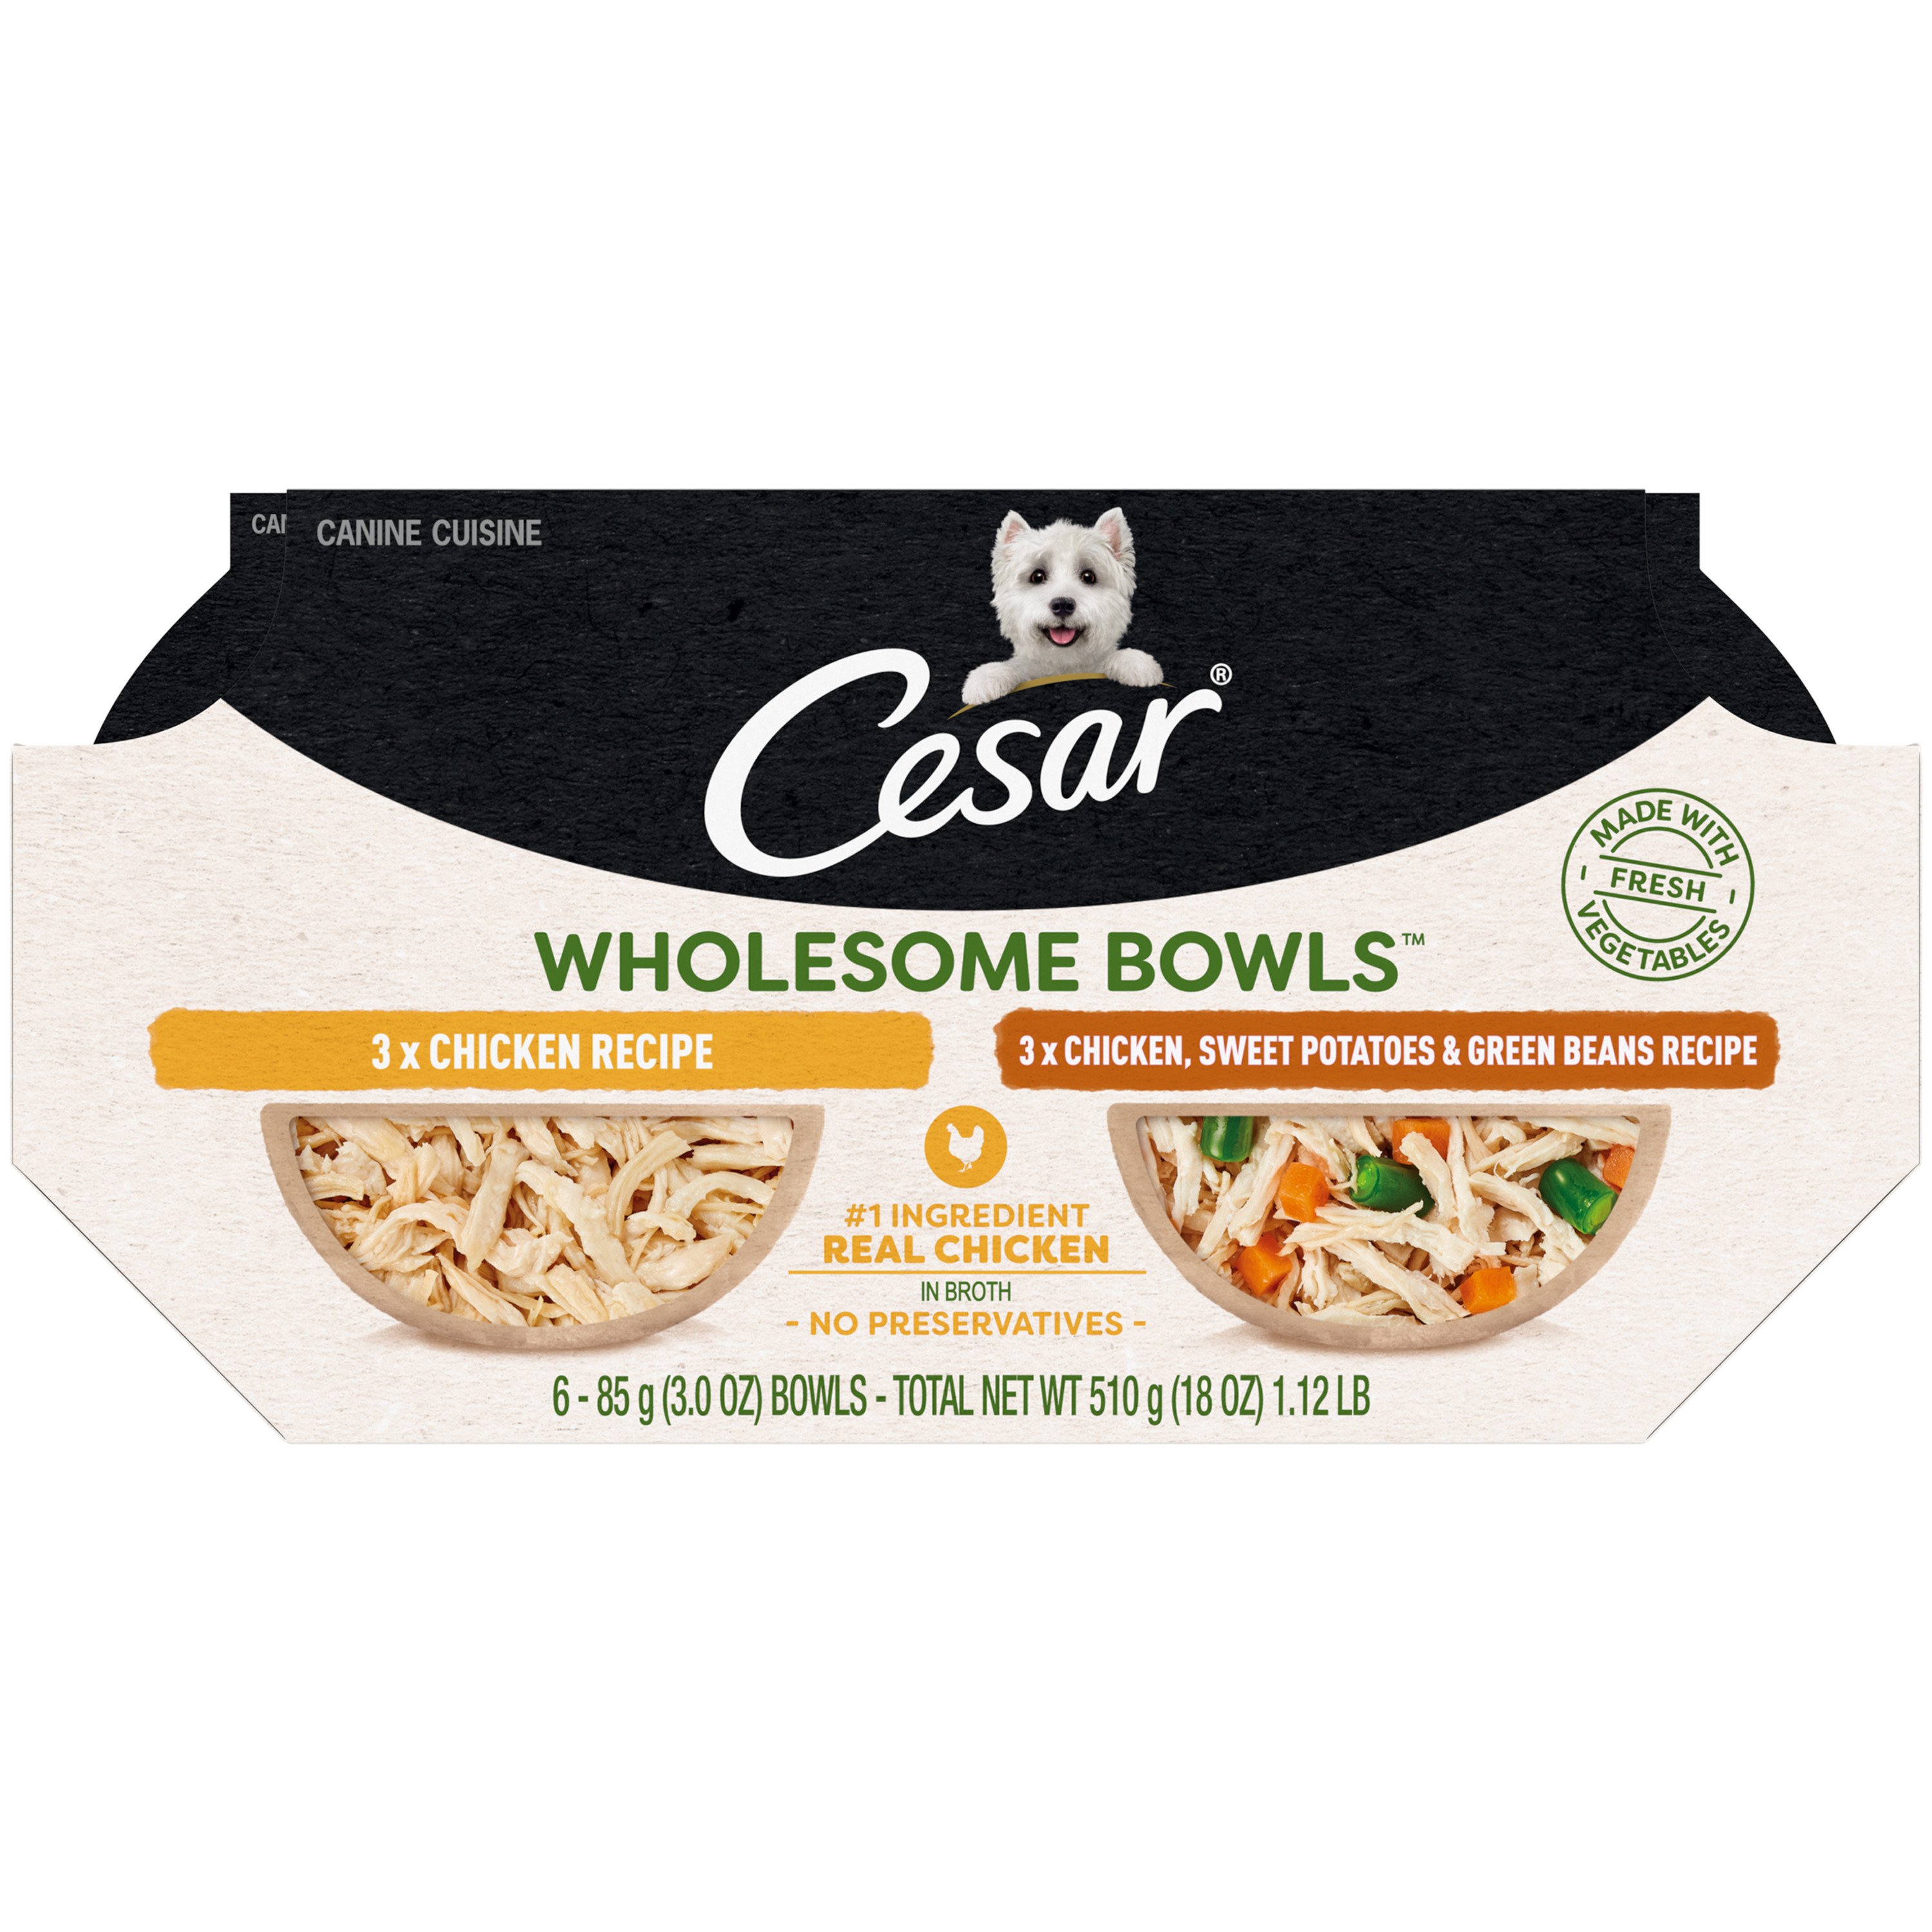 what are the ingredients in cesar dog food